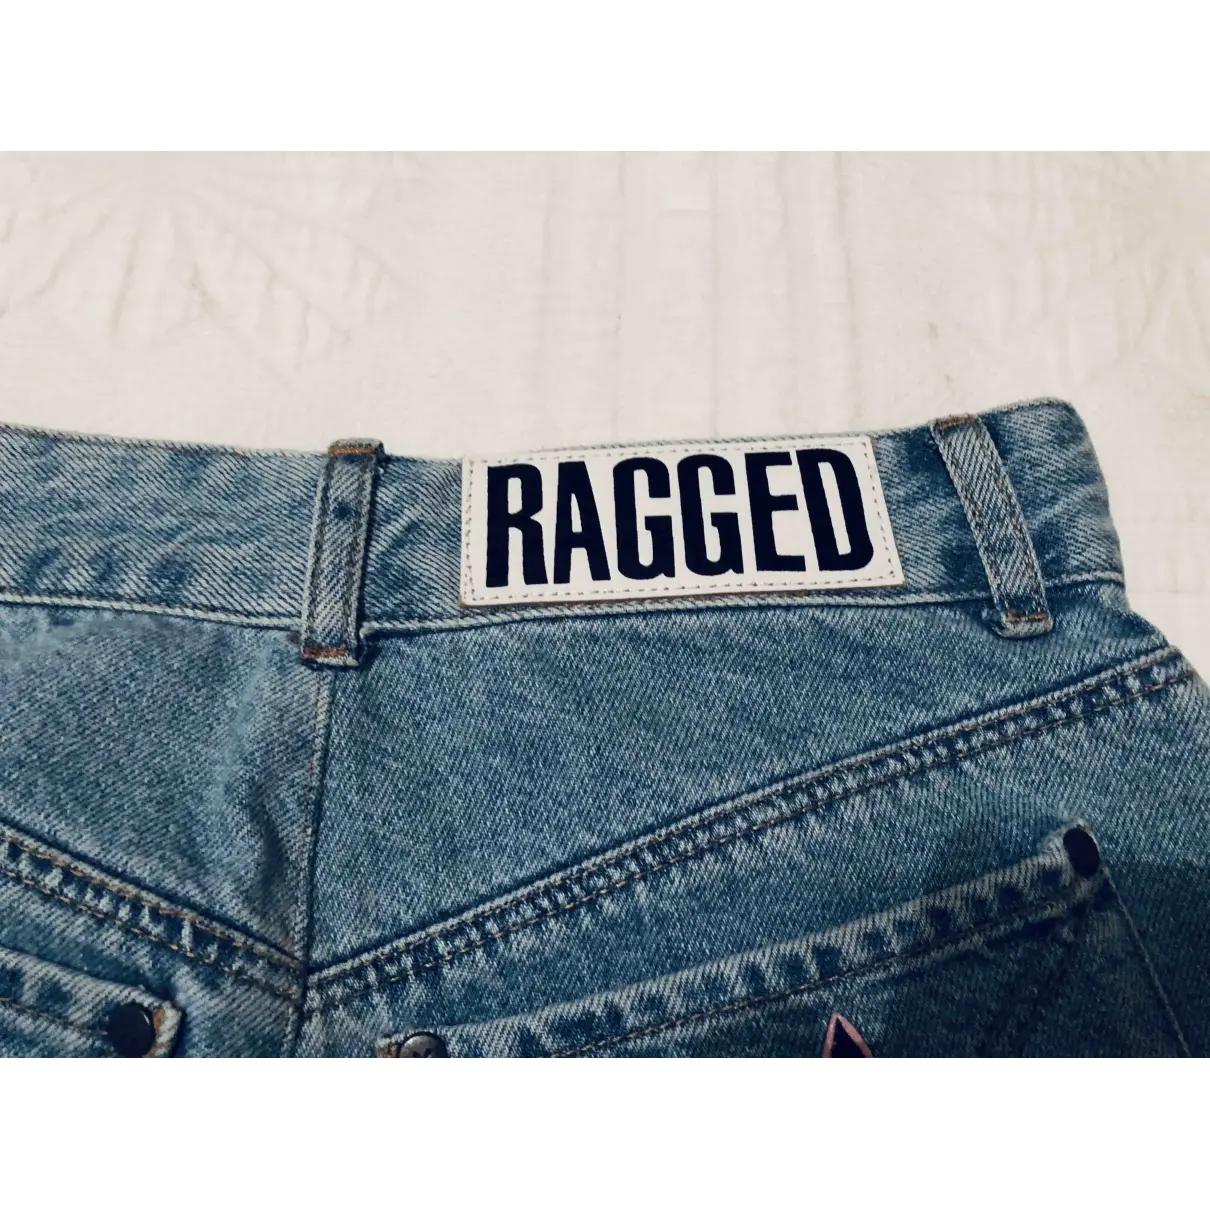 Buy The Ragged Priest Blue Cotton Jeans online